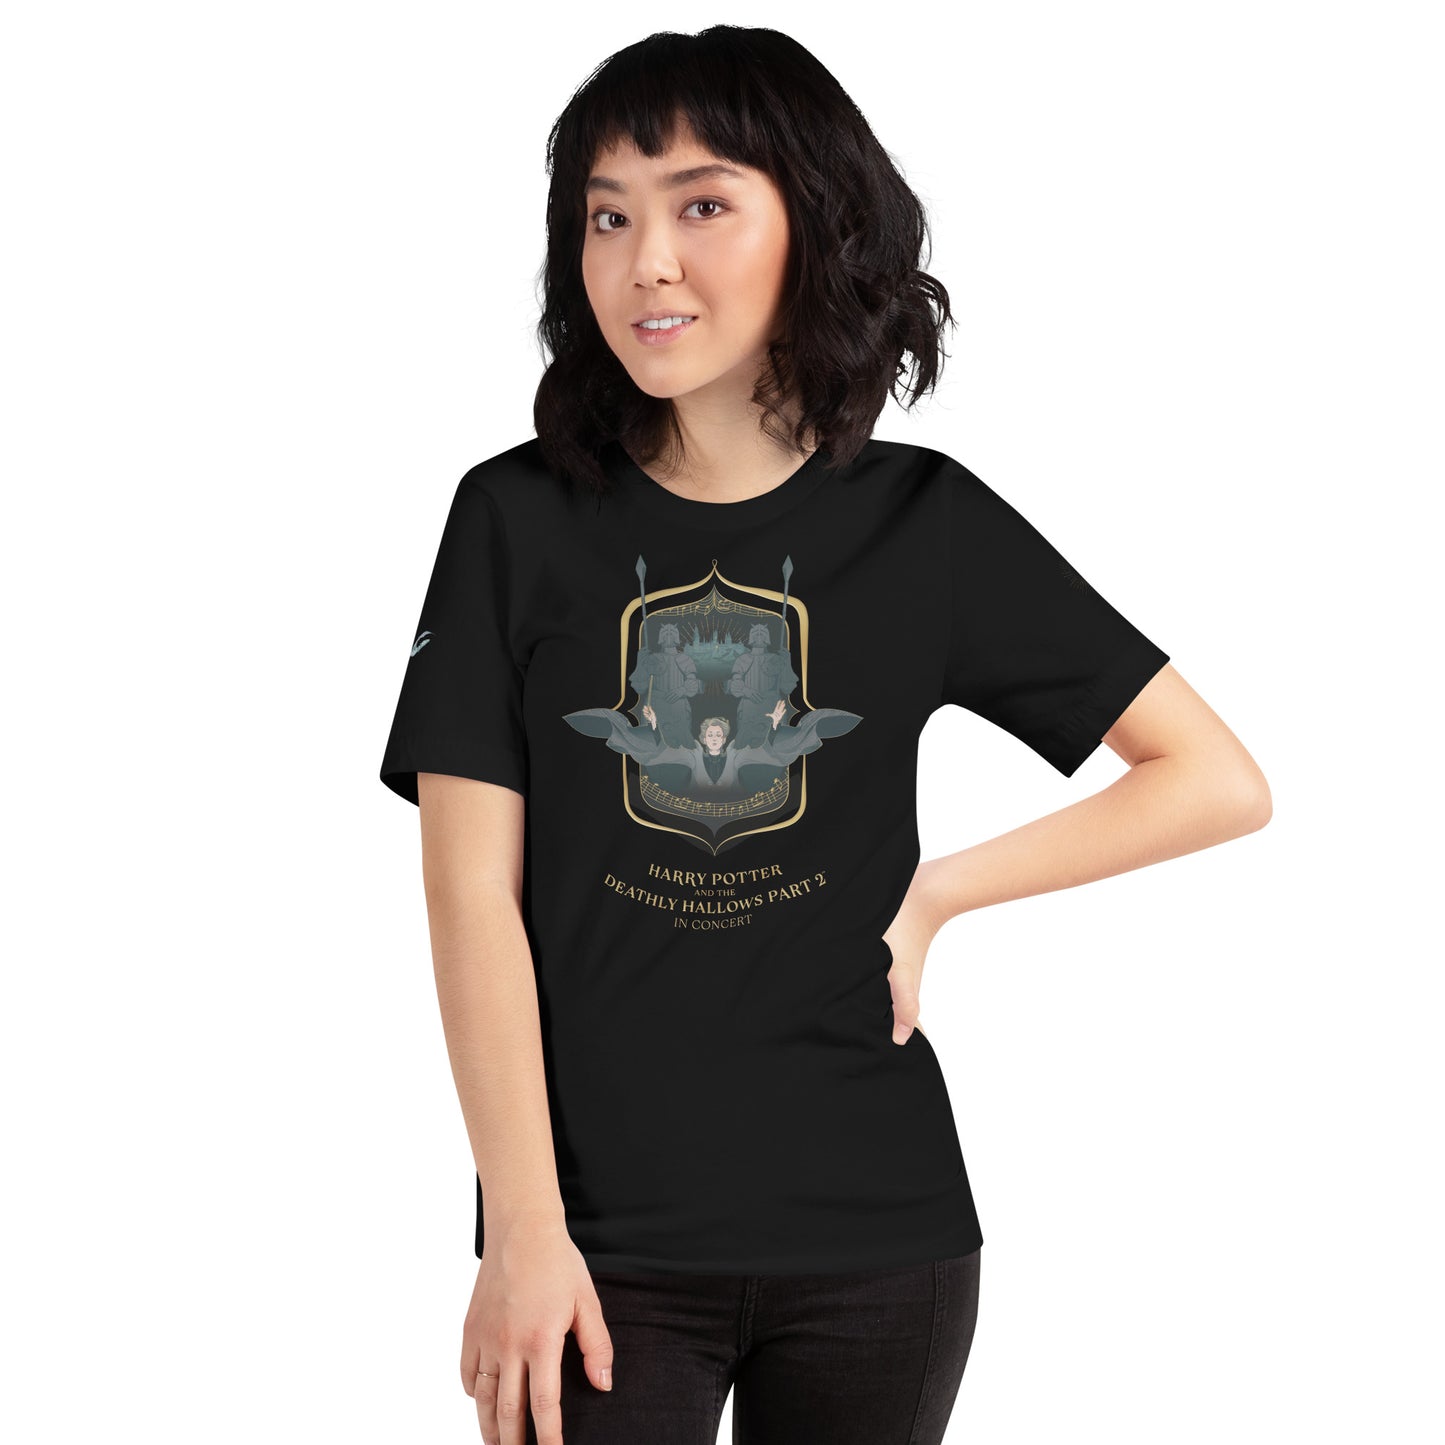 Harry Potter and the Deathly Hallows™ - Part 2 Unisex t-shirt (Chess)